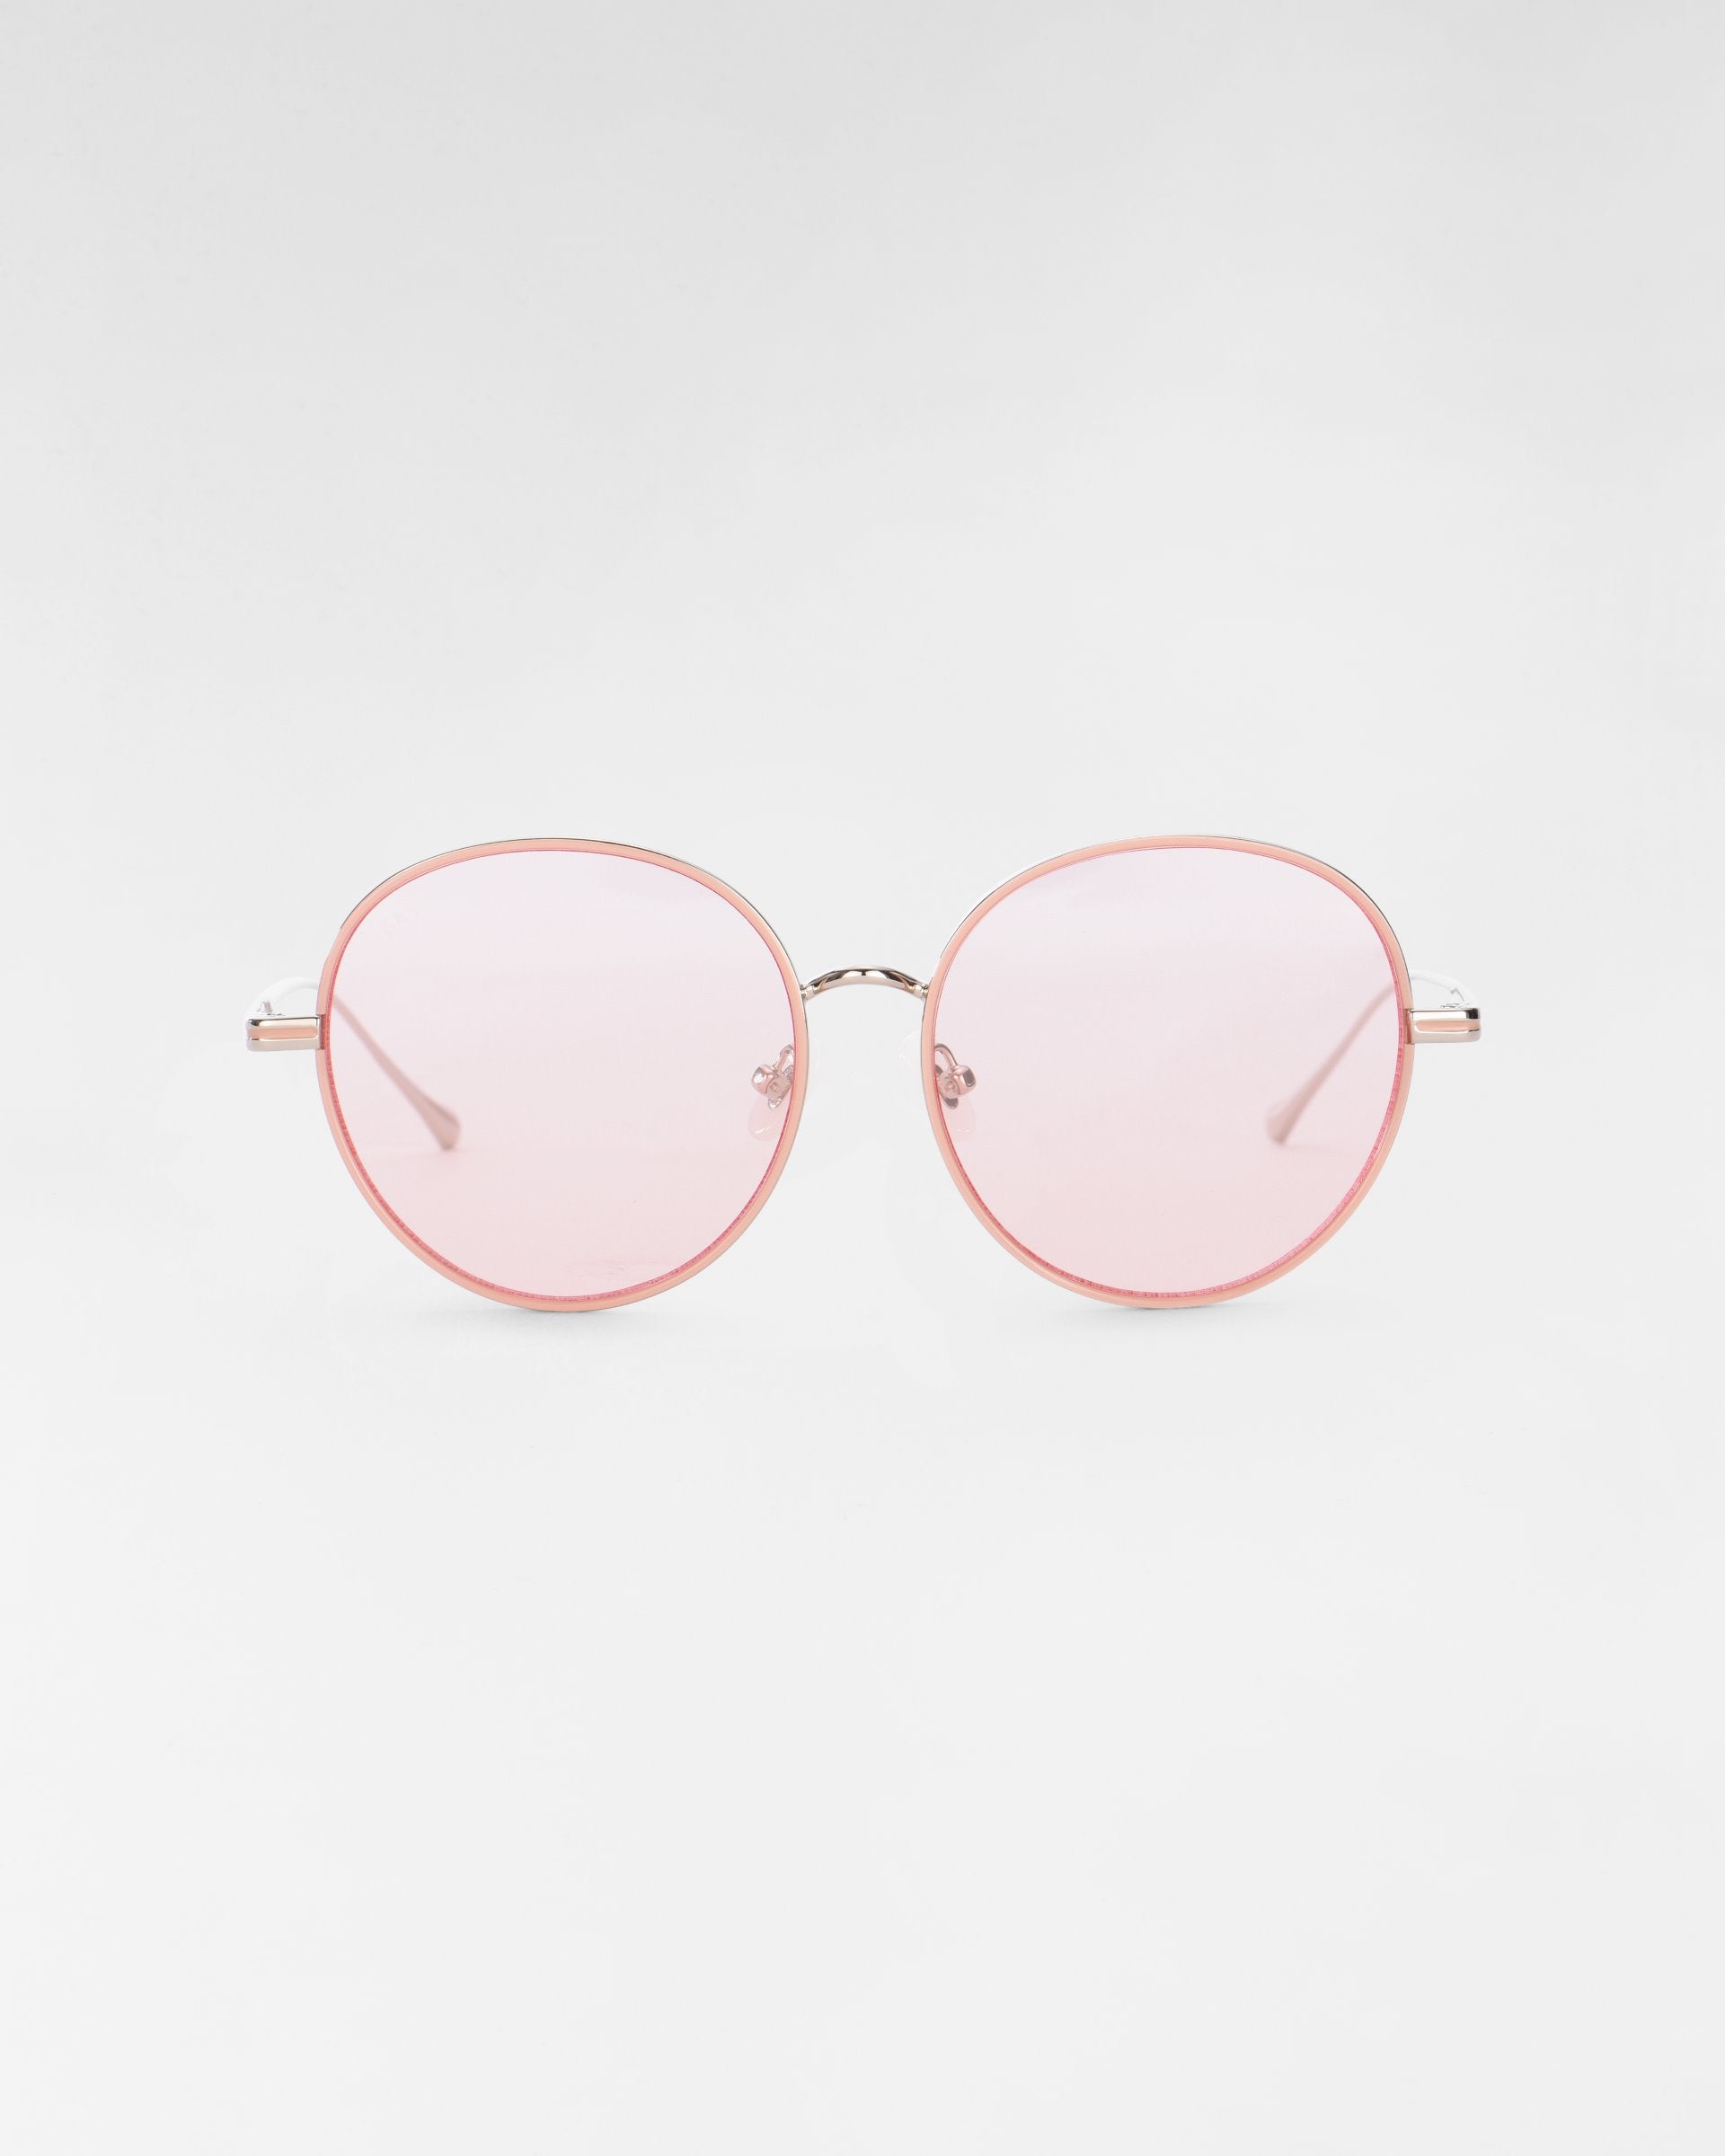 A pair of round Lemon sunglasses by For Art&#39;s Sake® with a thin, light pink metal frame and pink-tinted lenses against a white background. Featuring jadestone nose pads, the minimalist design gives a stylish and modern appearance.